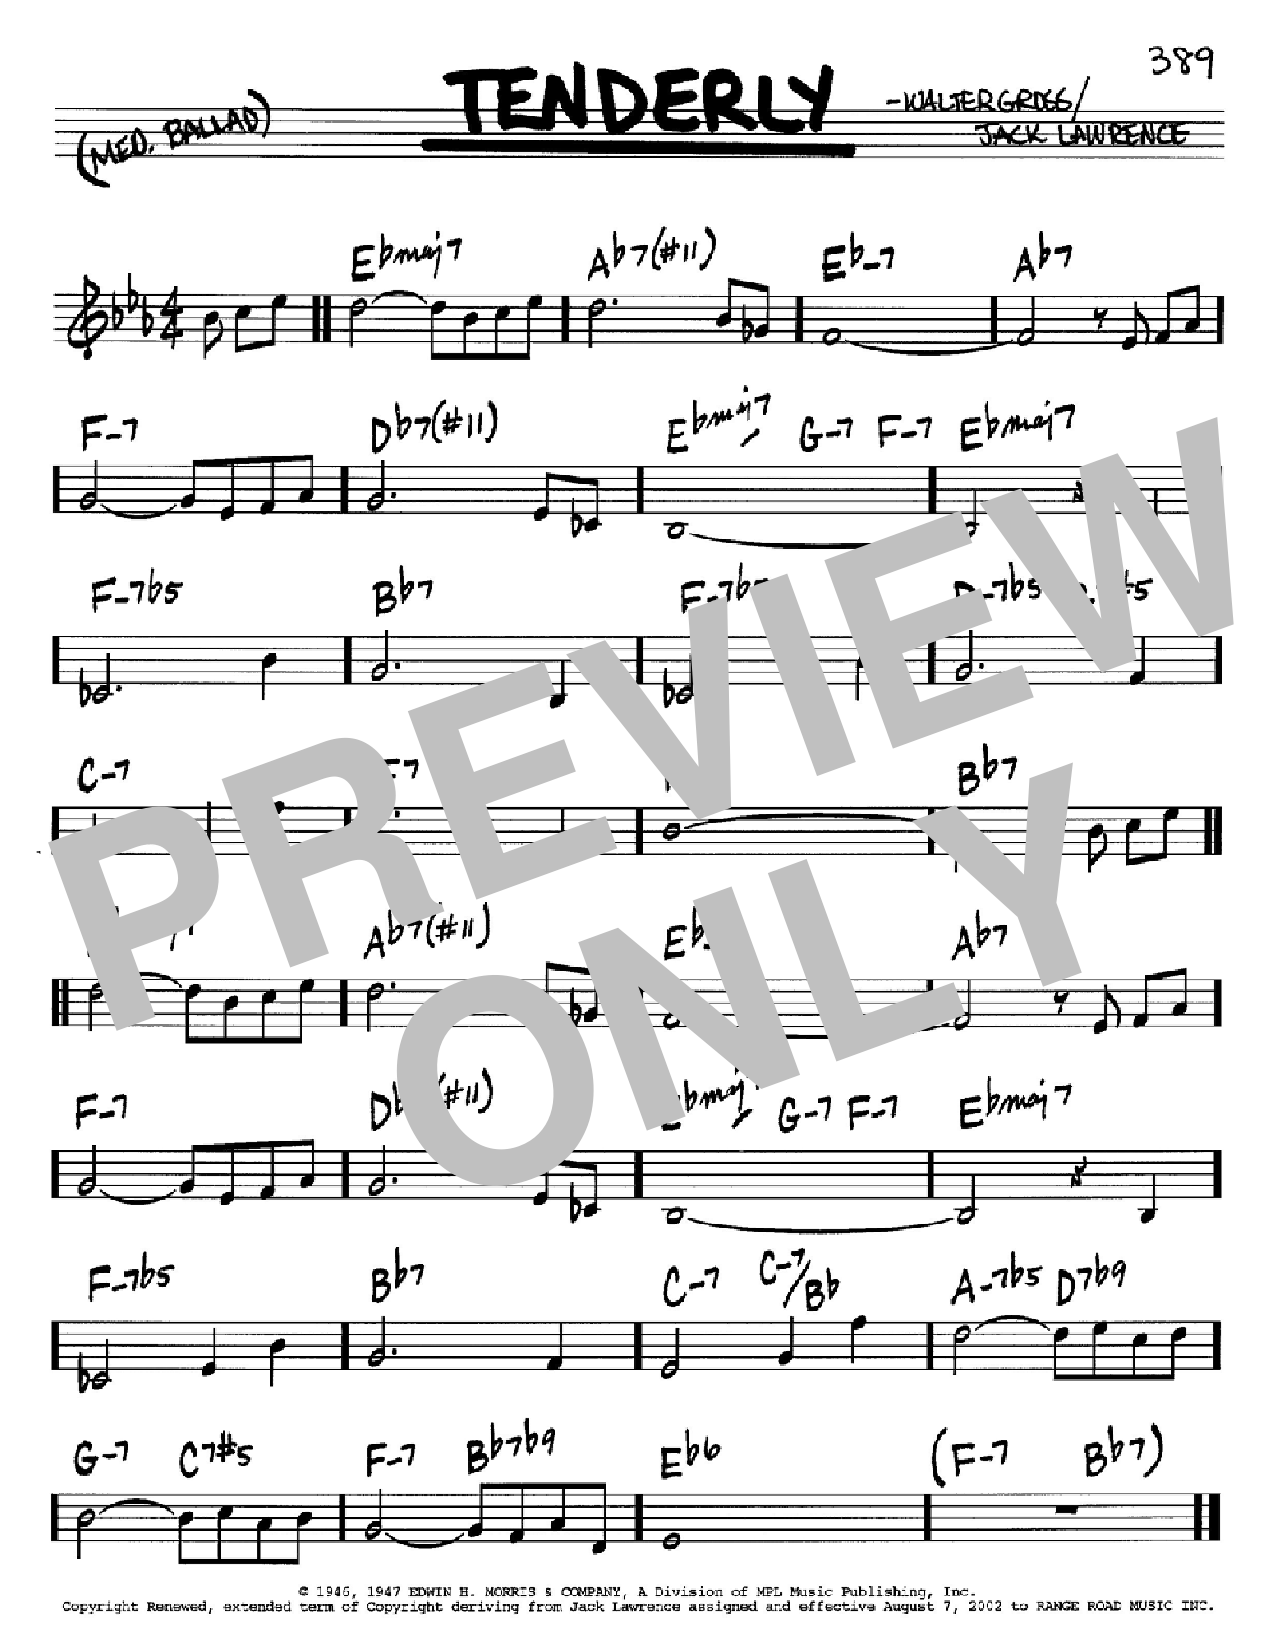 Jack Lawrence Tenderly sheet music notes and chords. Download Printable PDF.